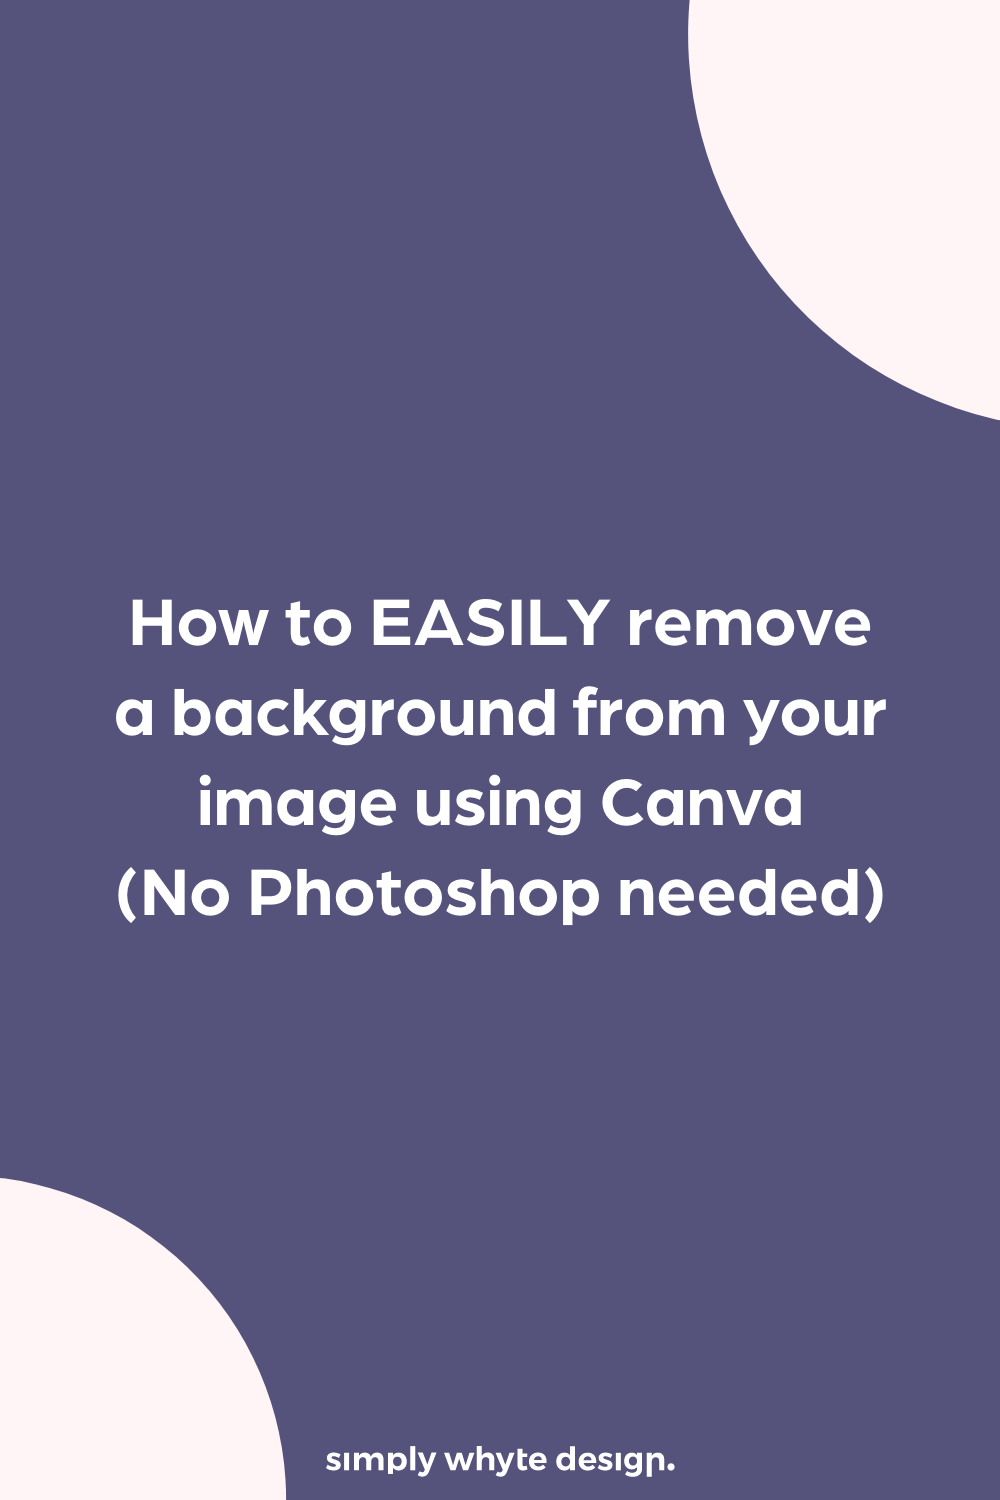 How to EASILY remove a background from your image using Canva (No Photoshop needed)16.png